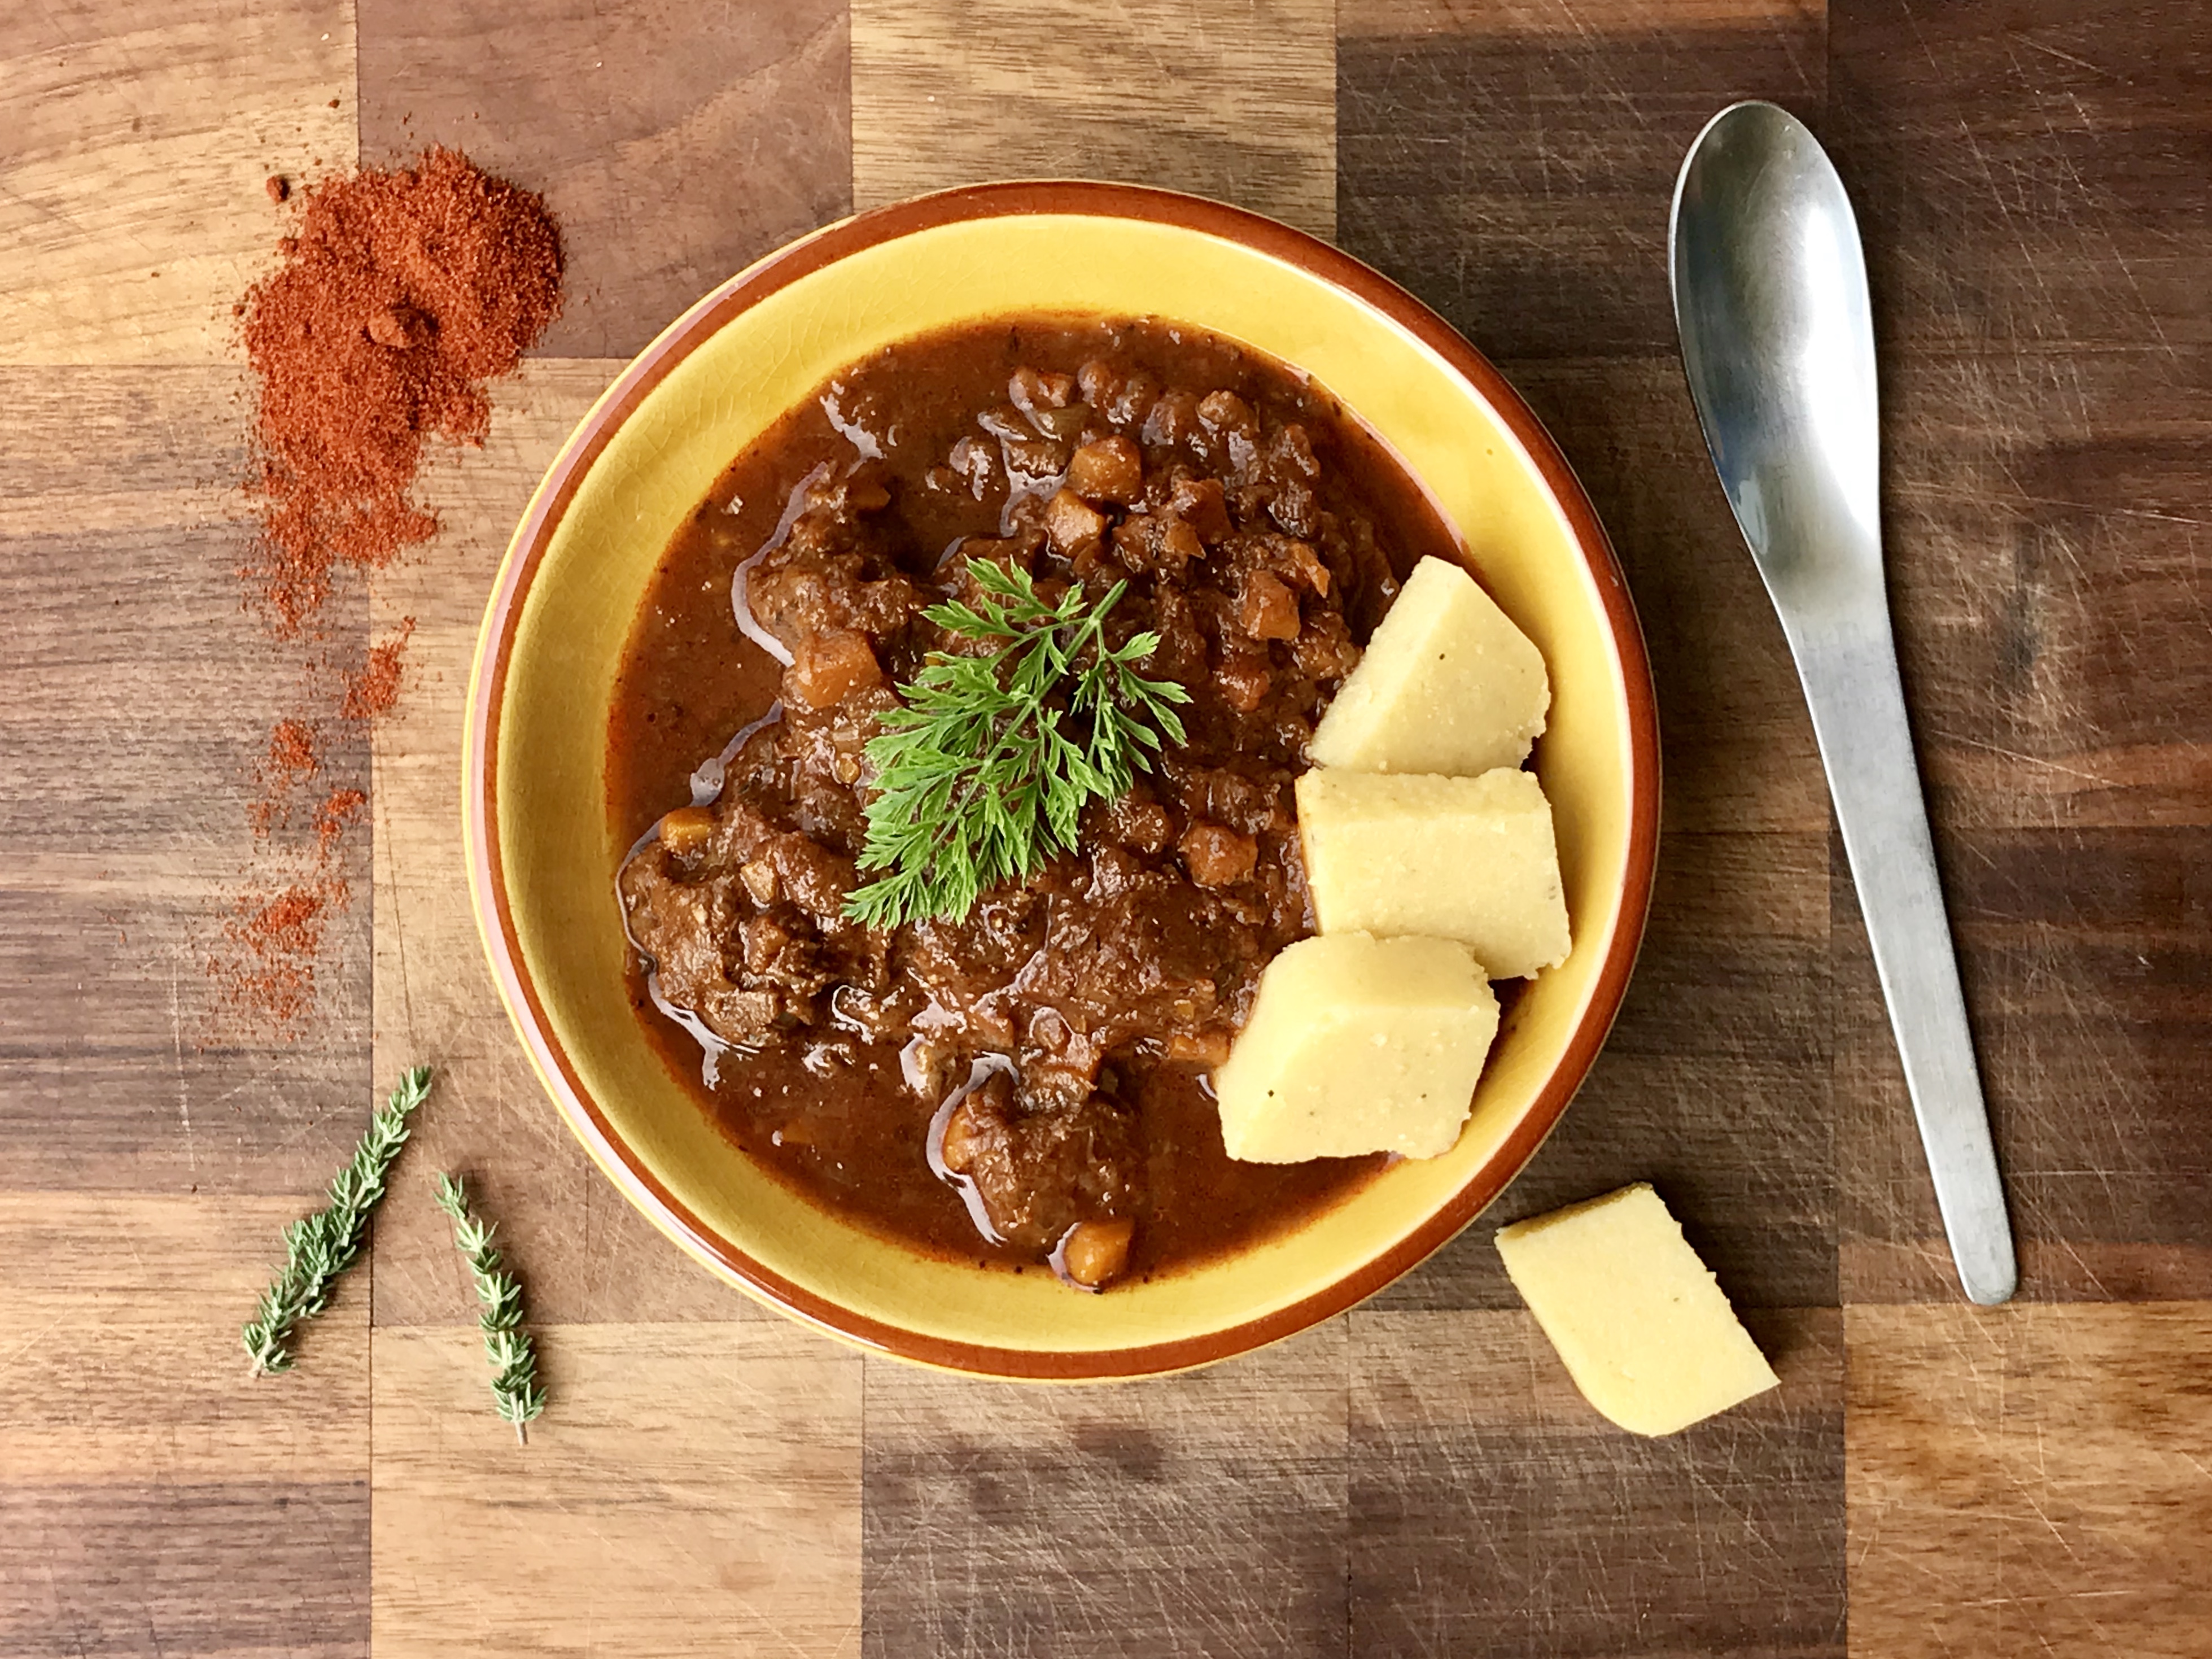 Musings on recipes and goulash